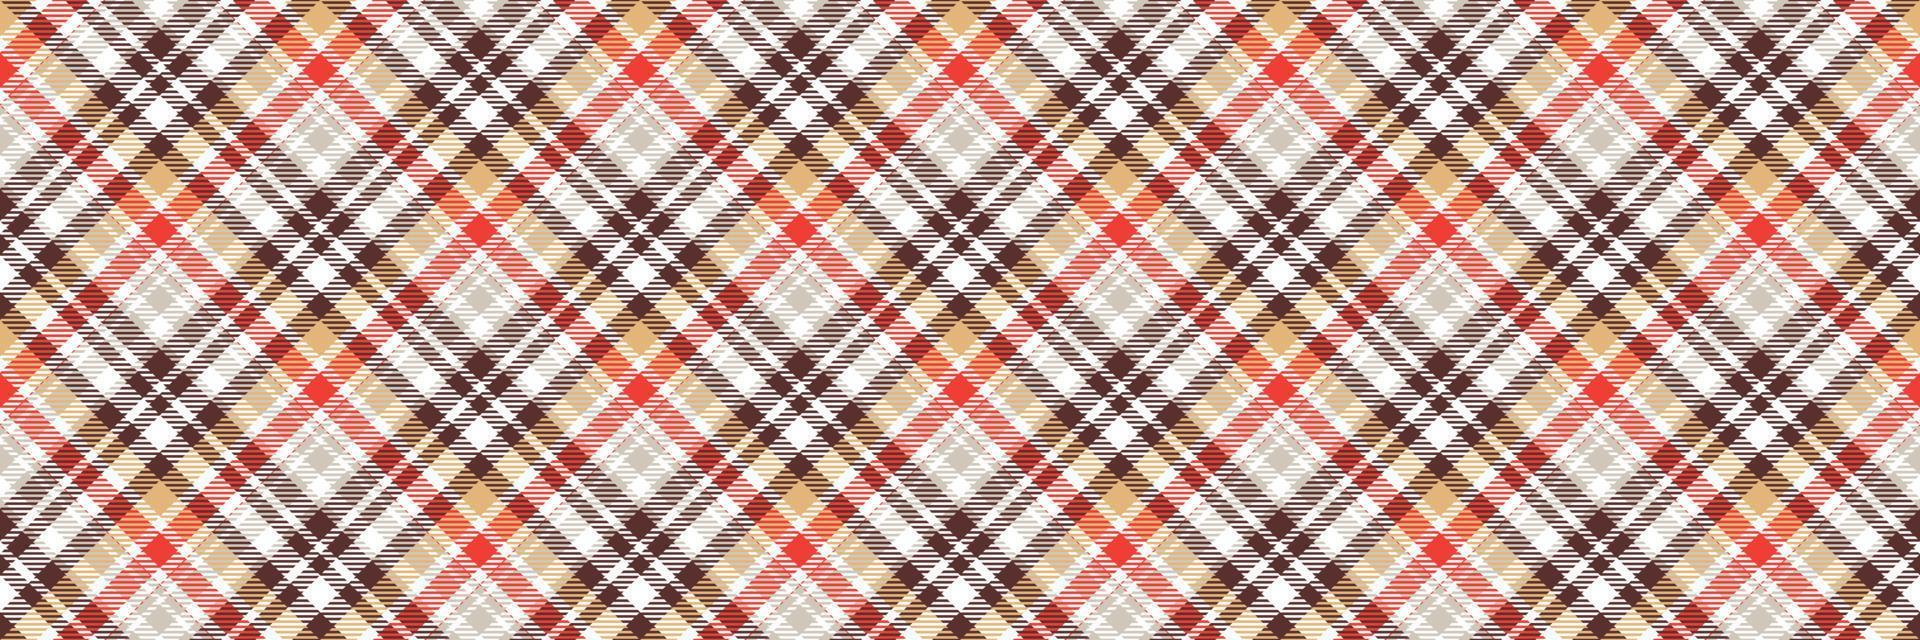 Check Plaid pattern  seamless is a patterned cloth consisting of criss crossed, horizontal and vertical bands in multiple colours.plaid Seamless for  scarf,pyjamas,blanket,duvet,kilt large shawl. vector